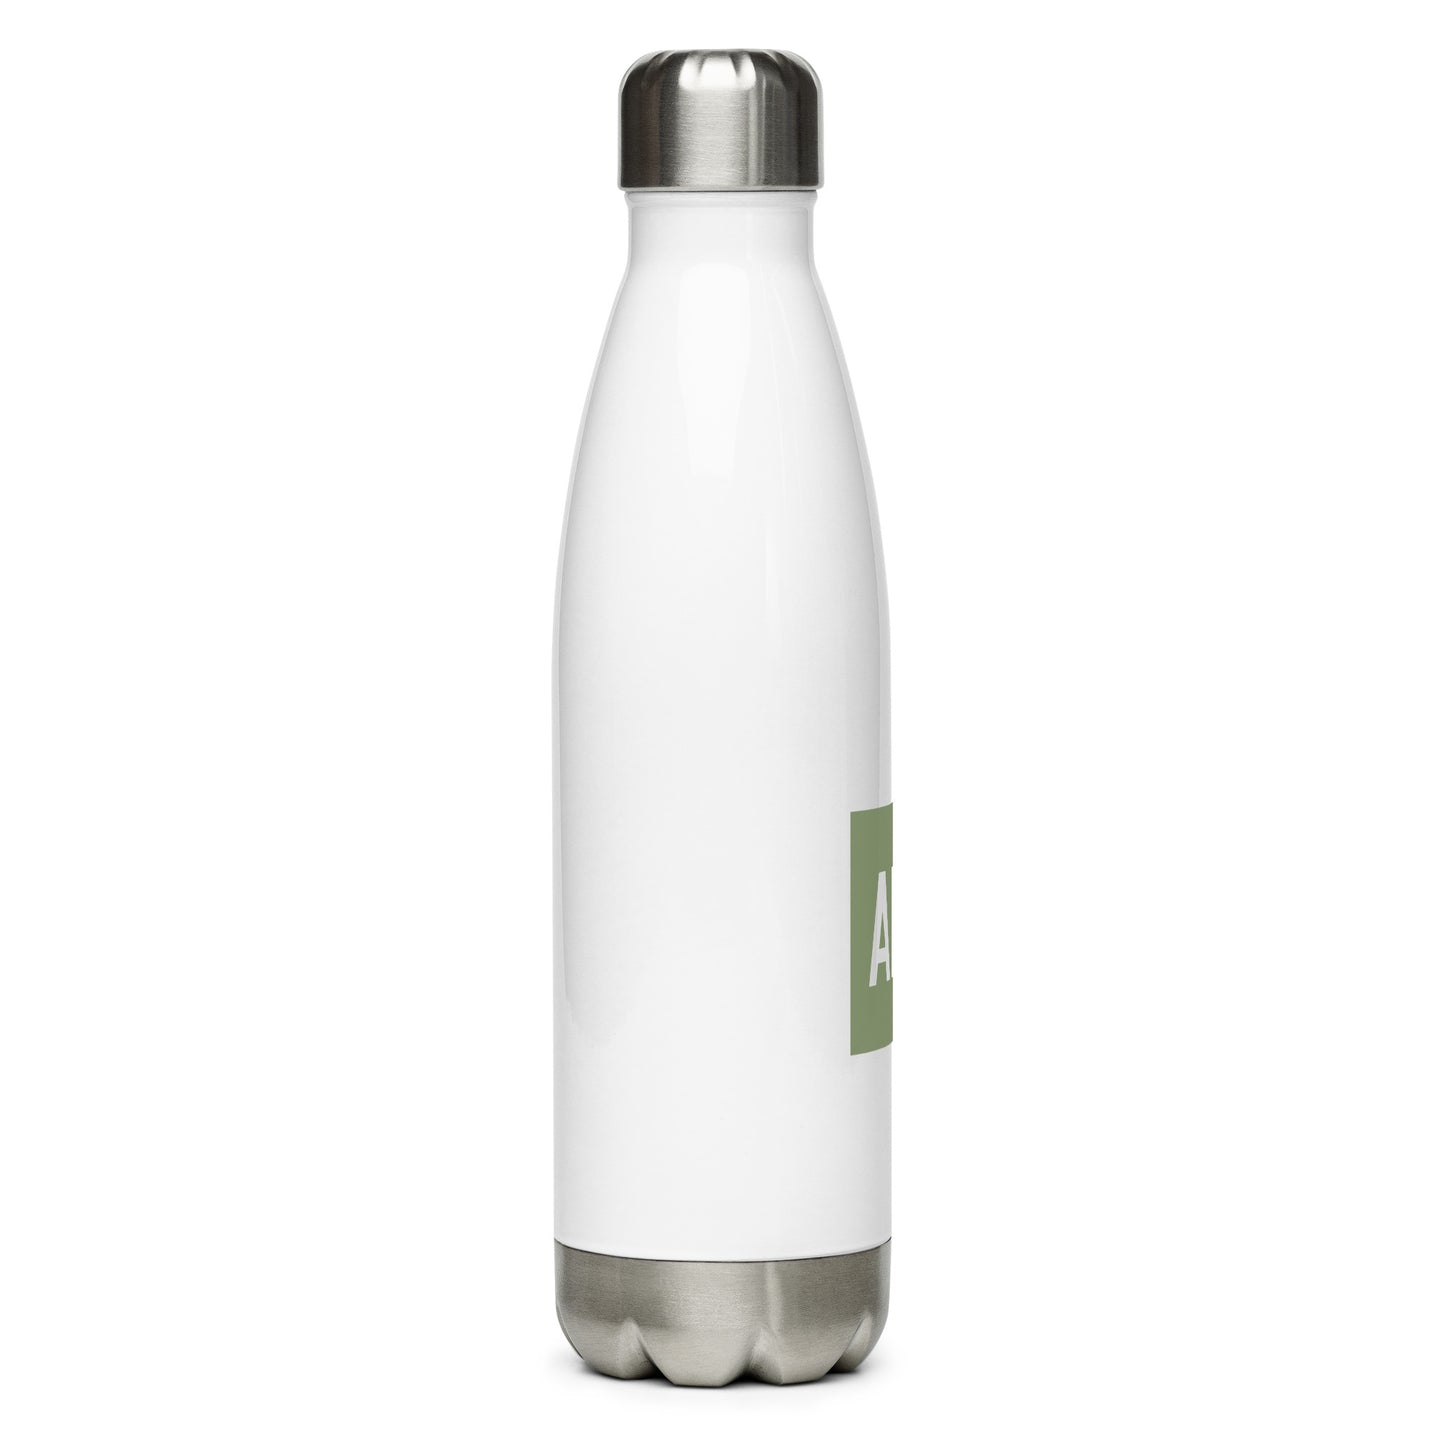 Aviation Gift Water Bottle - Camo Green • AMS Amsterdam • YHM Designs - Image 07